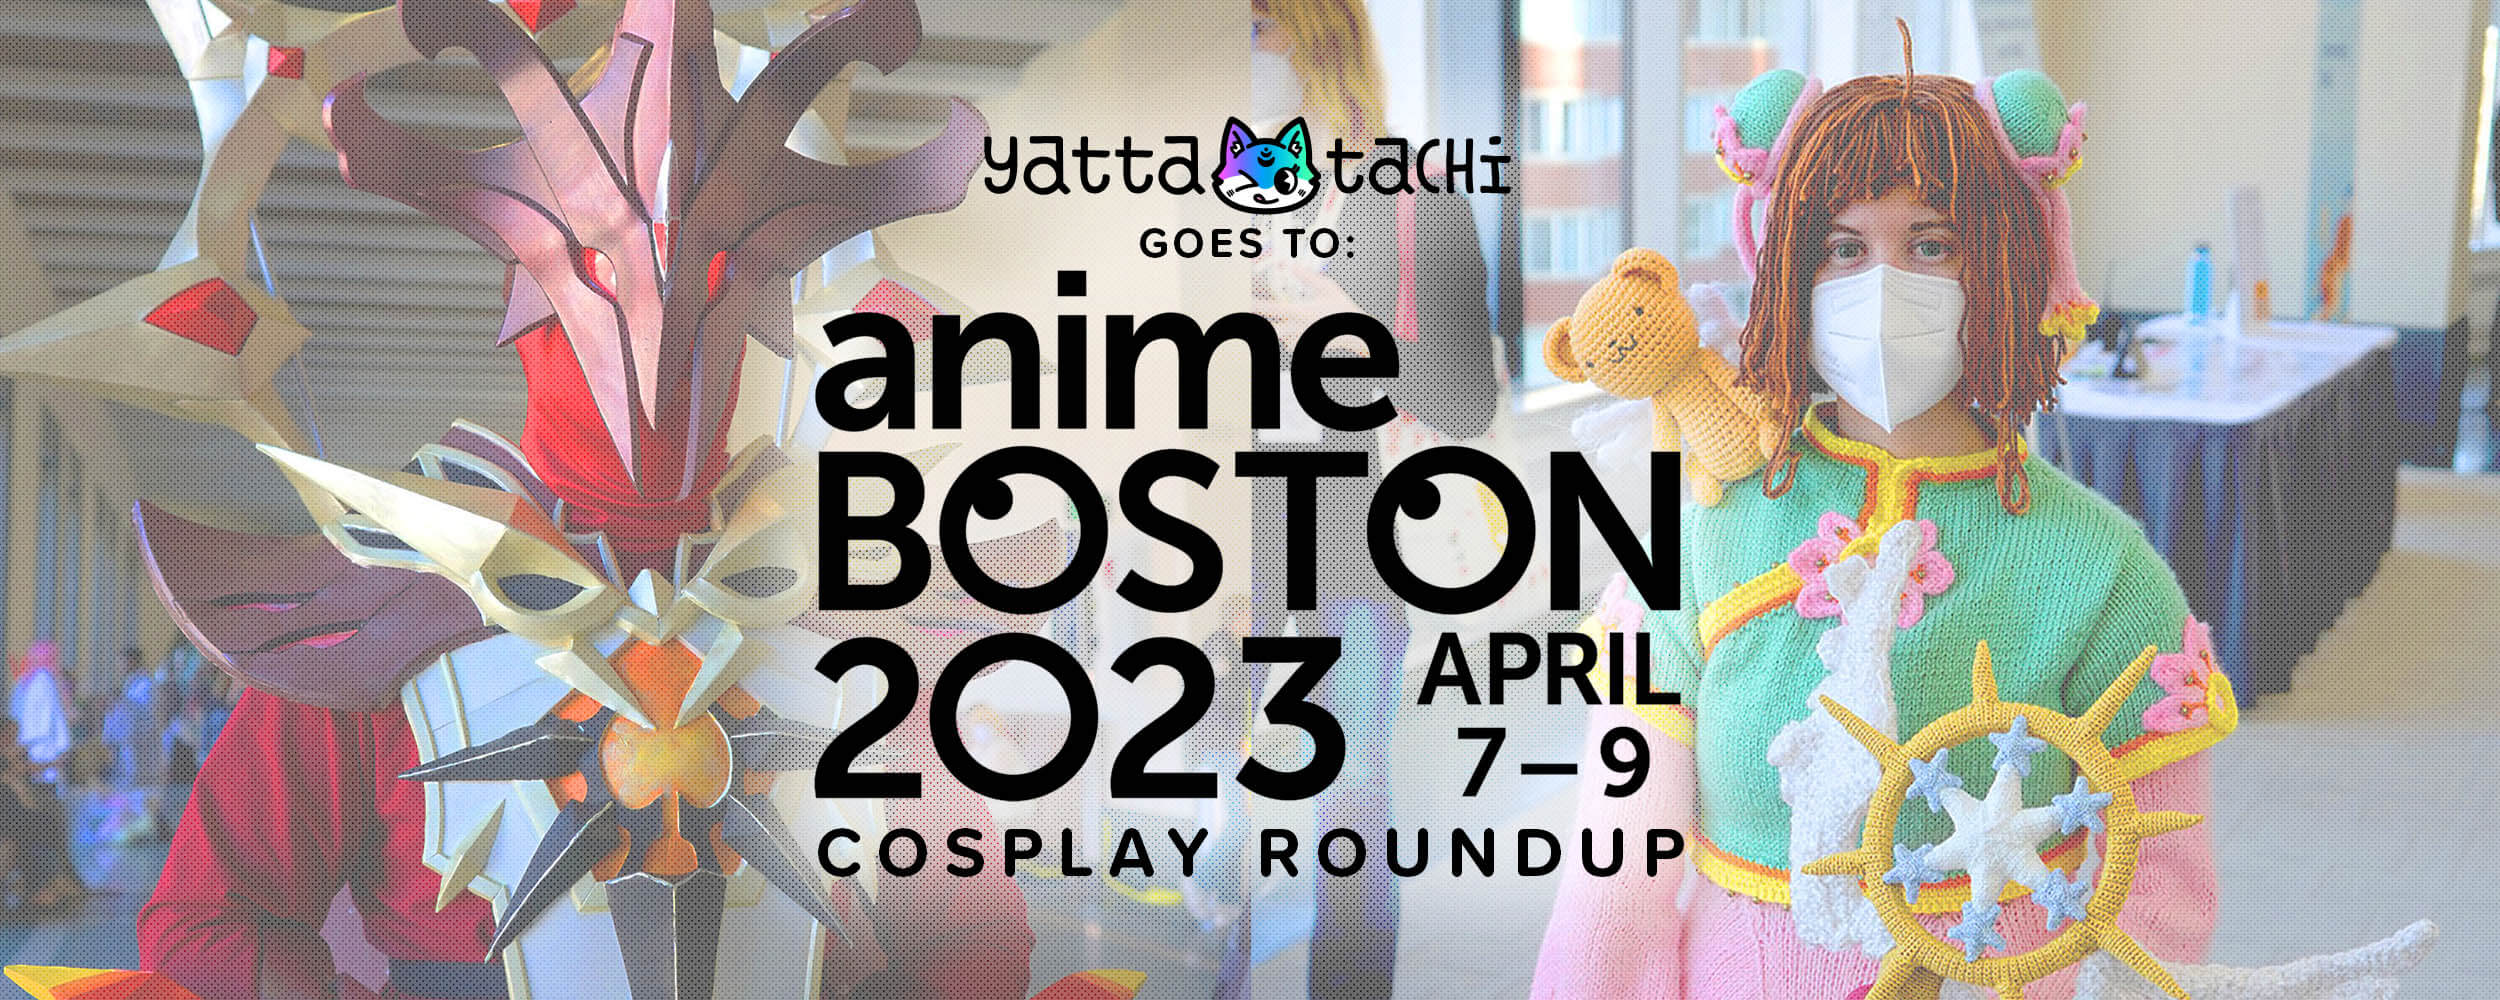 PYD at Anime Boston 2018: Autistic coded characters and ASD representation  in Anime/Manga - Partners for Youth with Disabilities